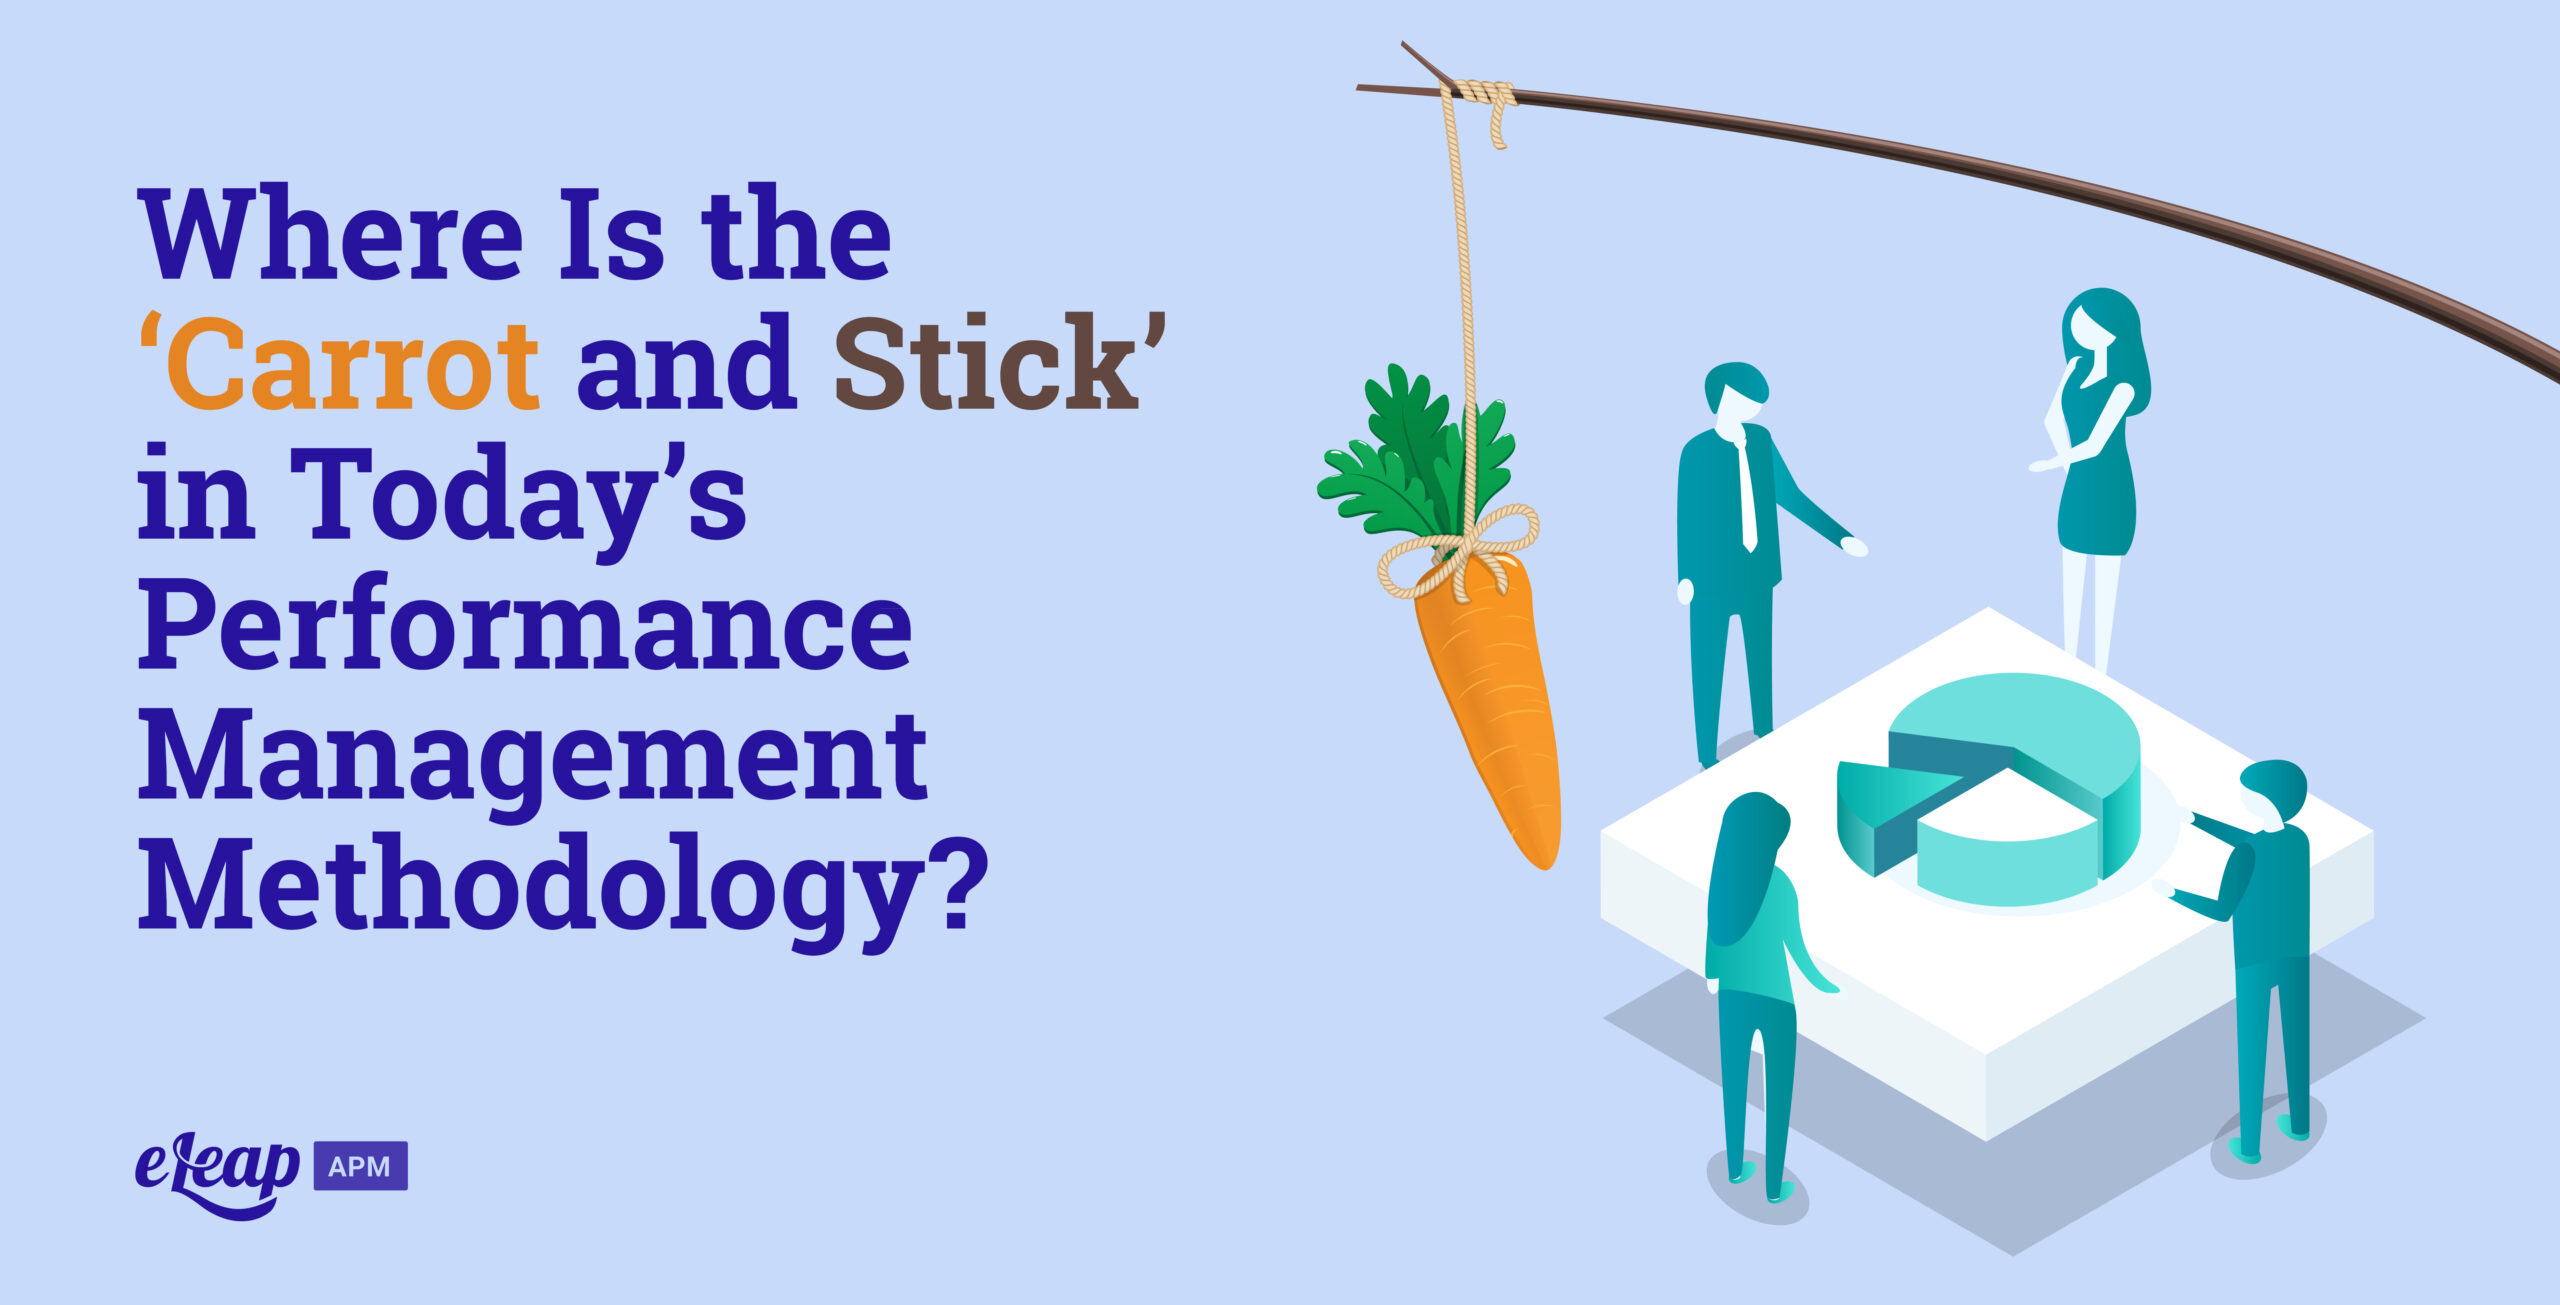 Where Is the ‘Carrot and Stick’ in Today’s Performance Management Methodology?